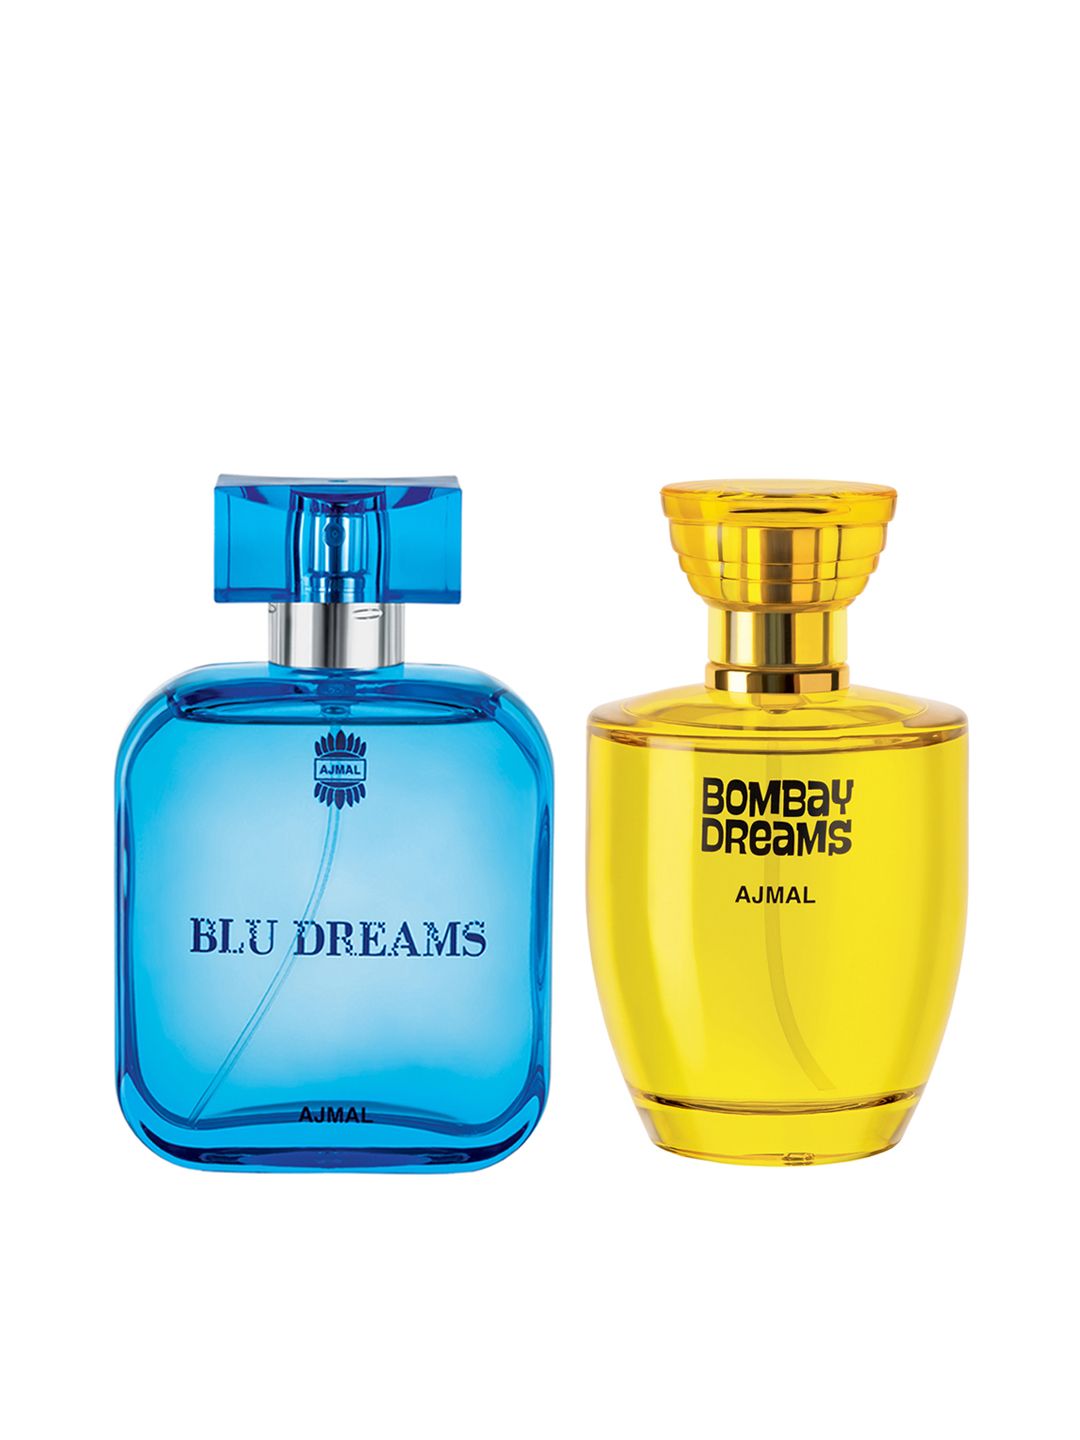 Ajmal Women Set Of Blu Dreams EDP Fougere & Bombay Dreams EDP Floral Price in India